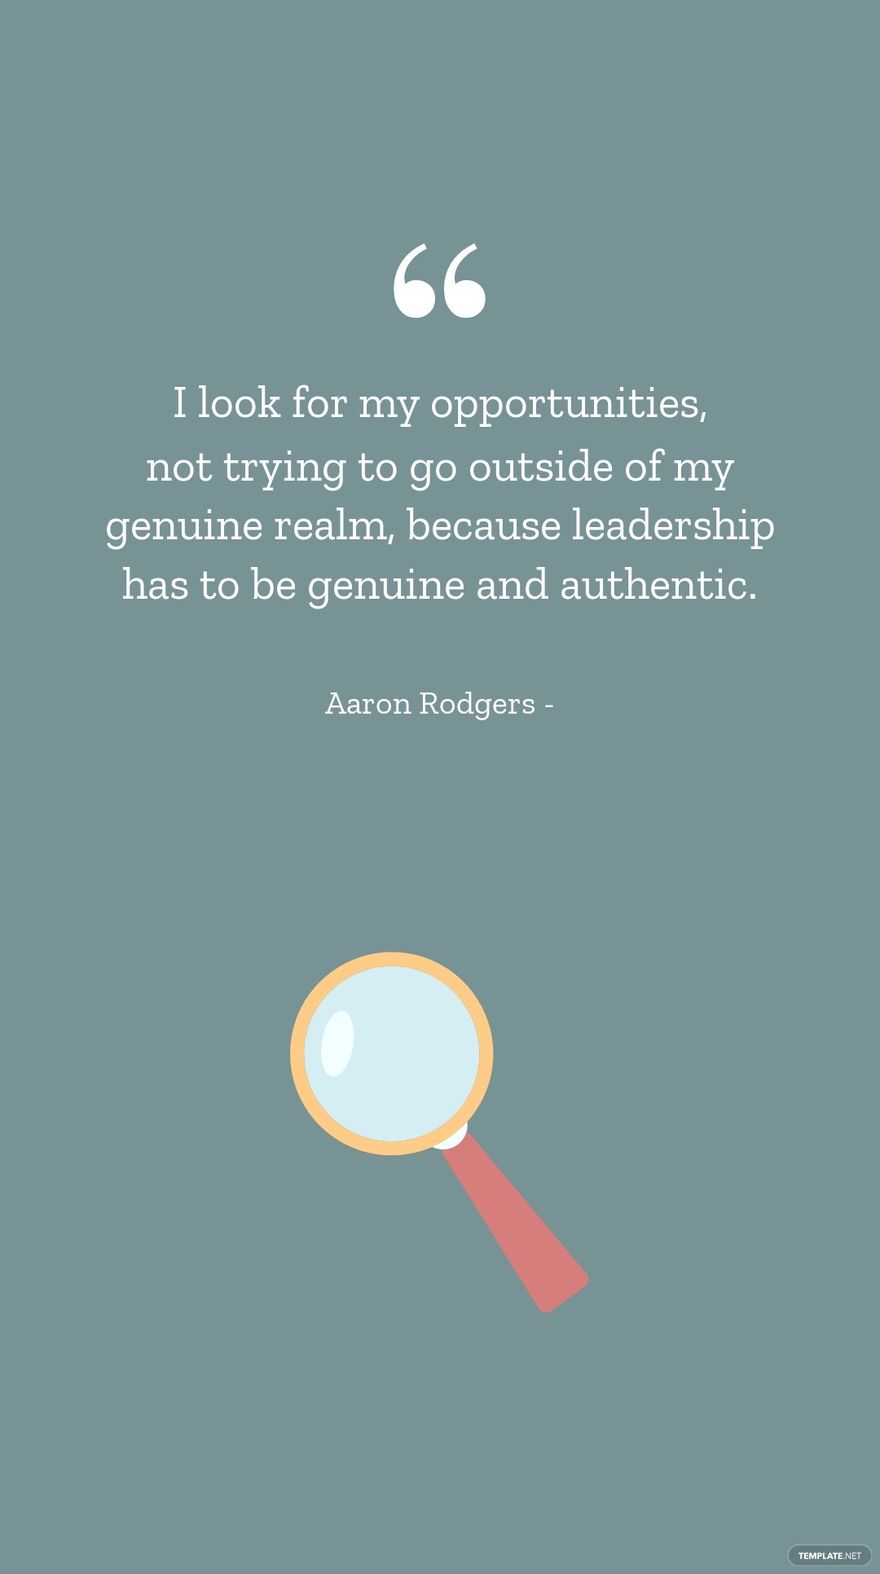 Aaron Rodgers - I look for my opportunities, not trying to go outside of my genuine realm, because leadership has to be genuine and authentic.